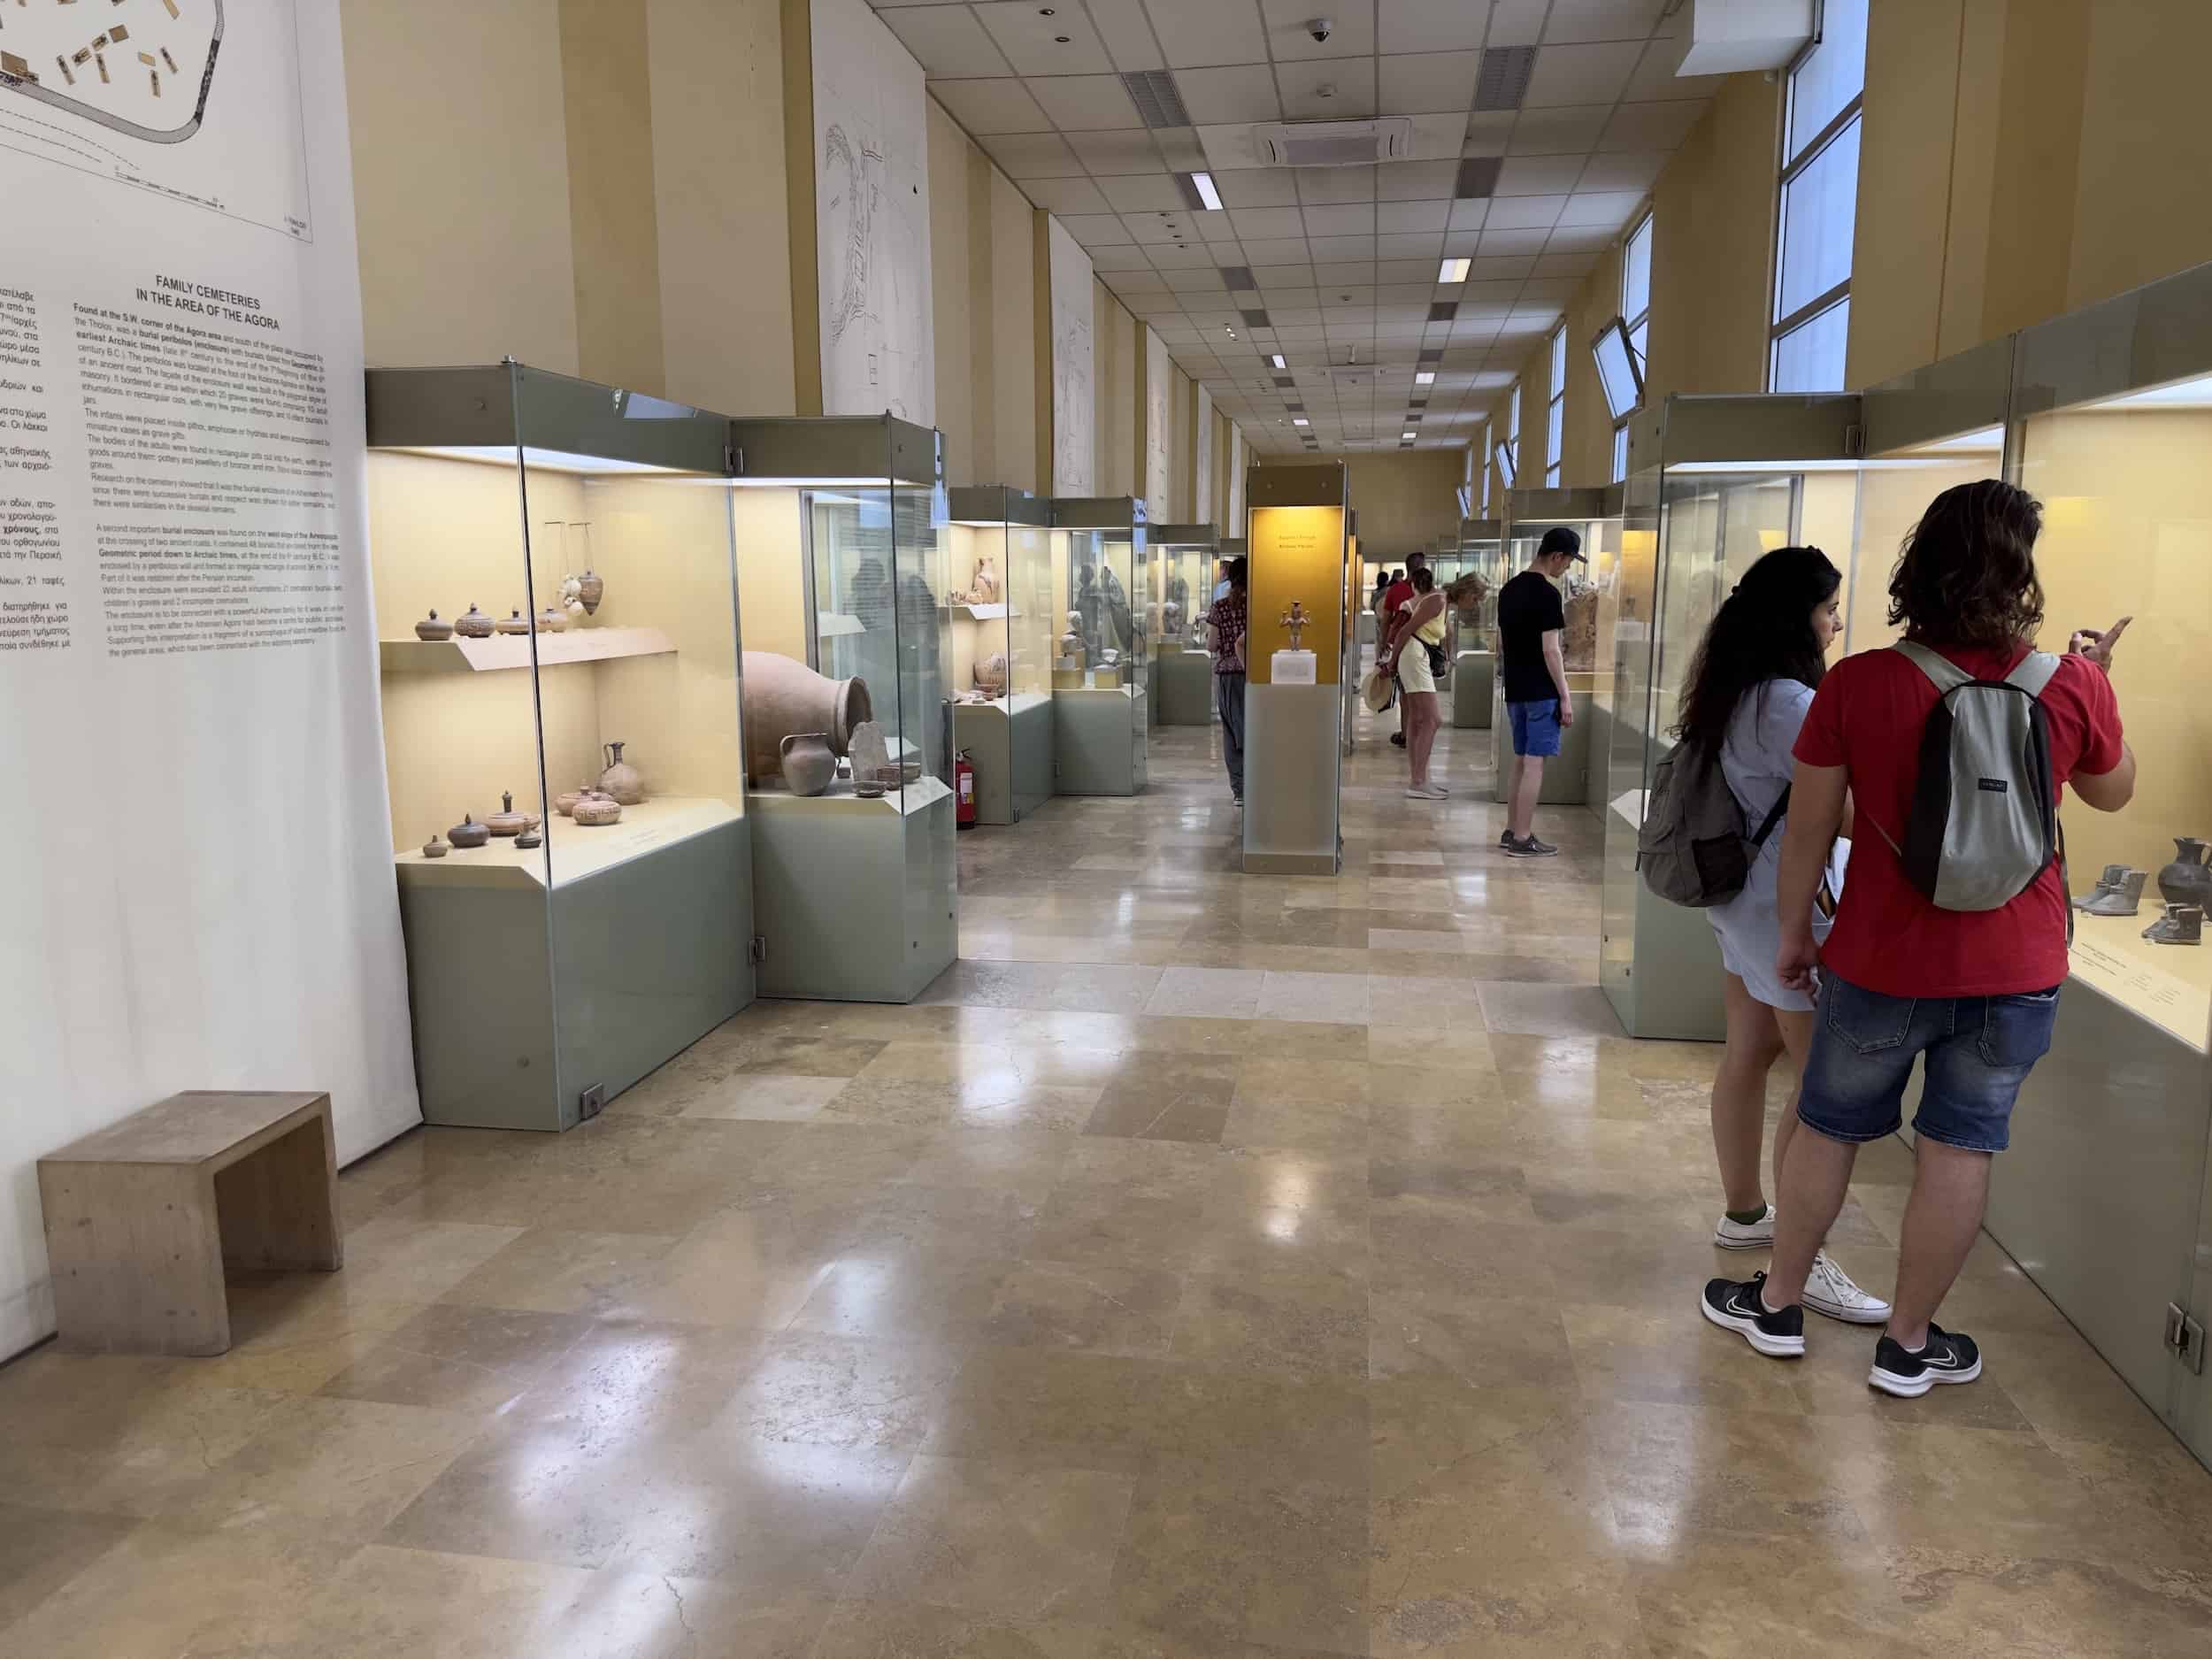 Exhibits in the shops of the Stoa of Attalos in the Museum of the Ancient Agora of Athens